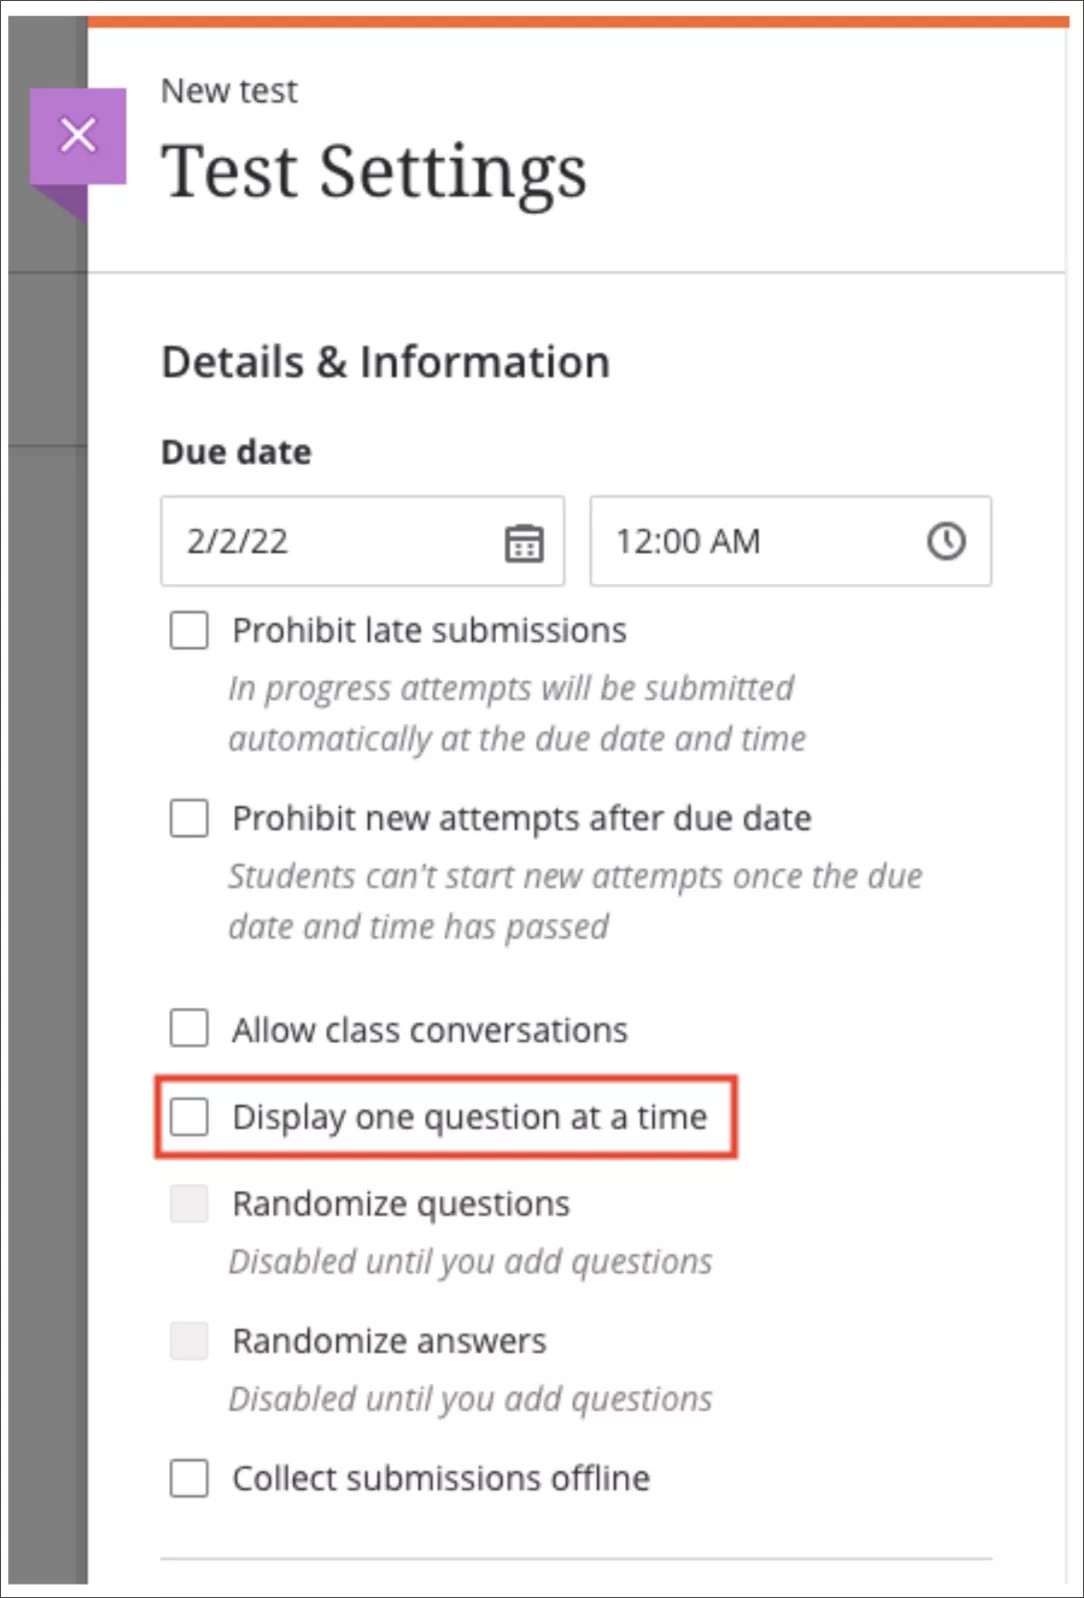 Display one question at a time from test settings is highlighted. 